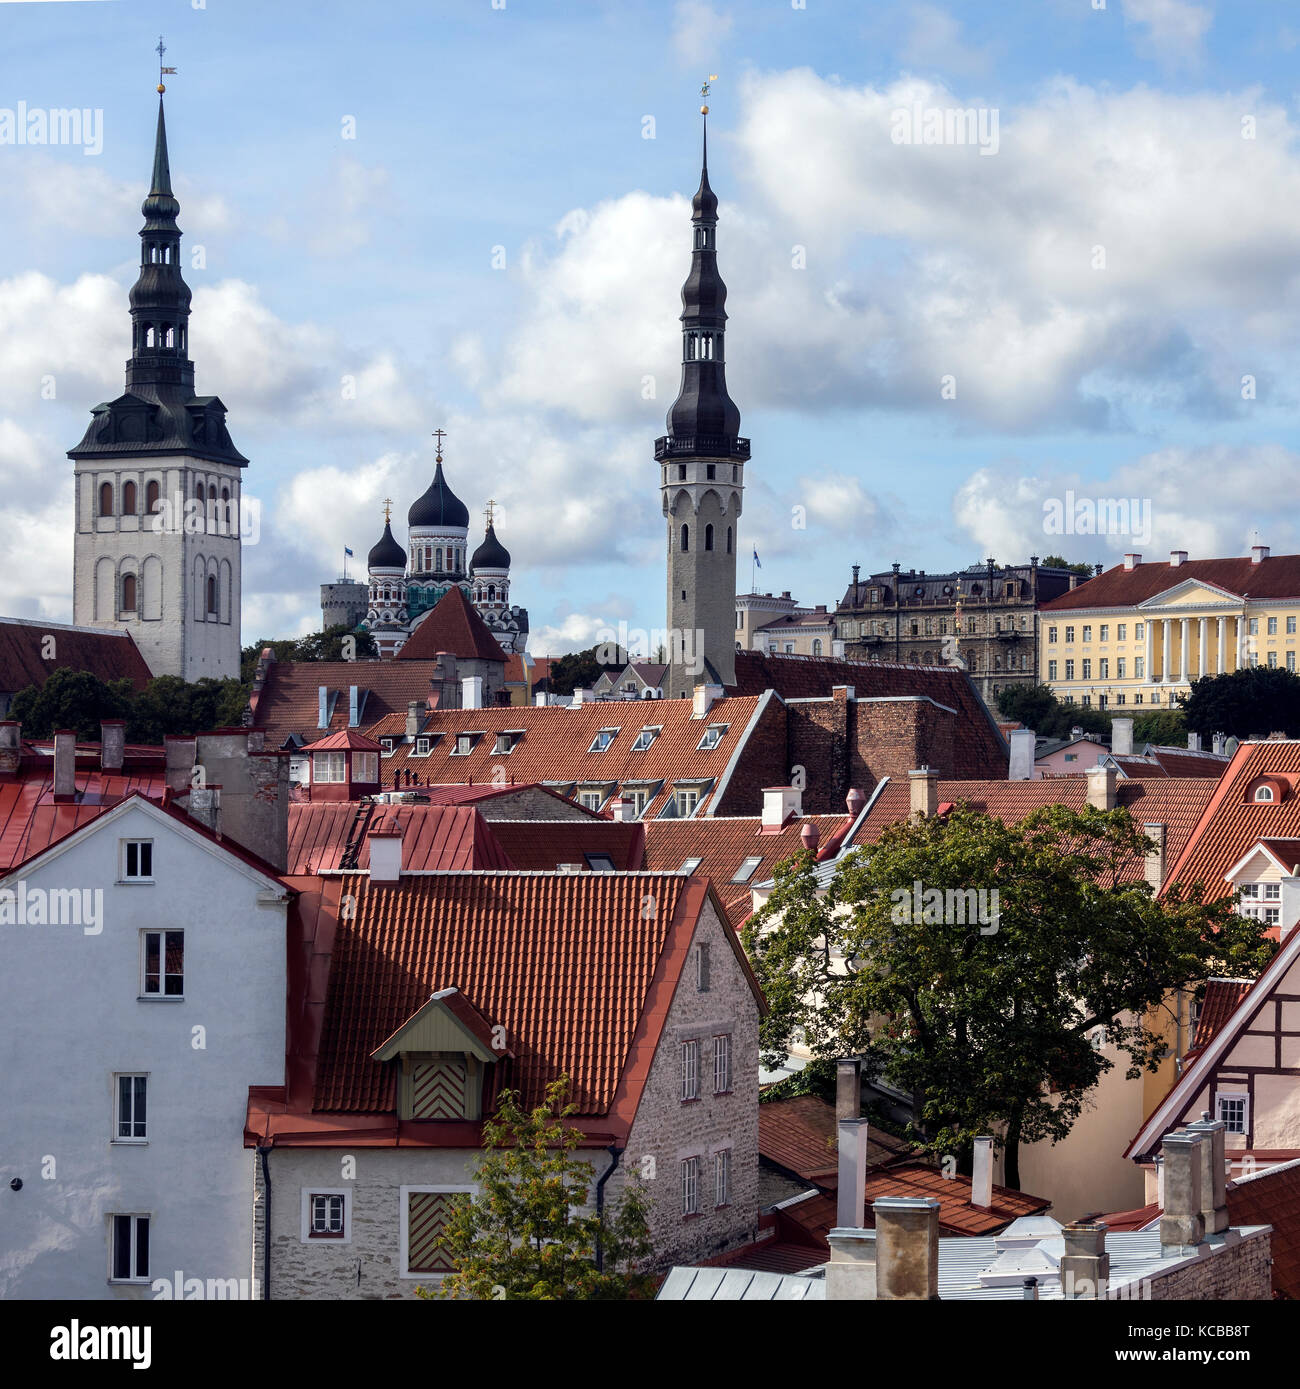 Skyline of Tallinn in Estonia. The three churches are - St Nicholas Church,  Alexander Nevsky Cathedral and the Church of the Holy Spirit Stock Photo -  Alamy